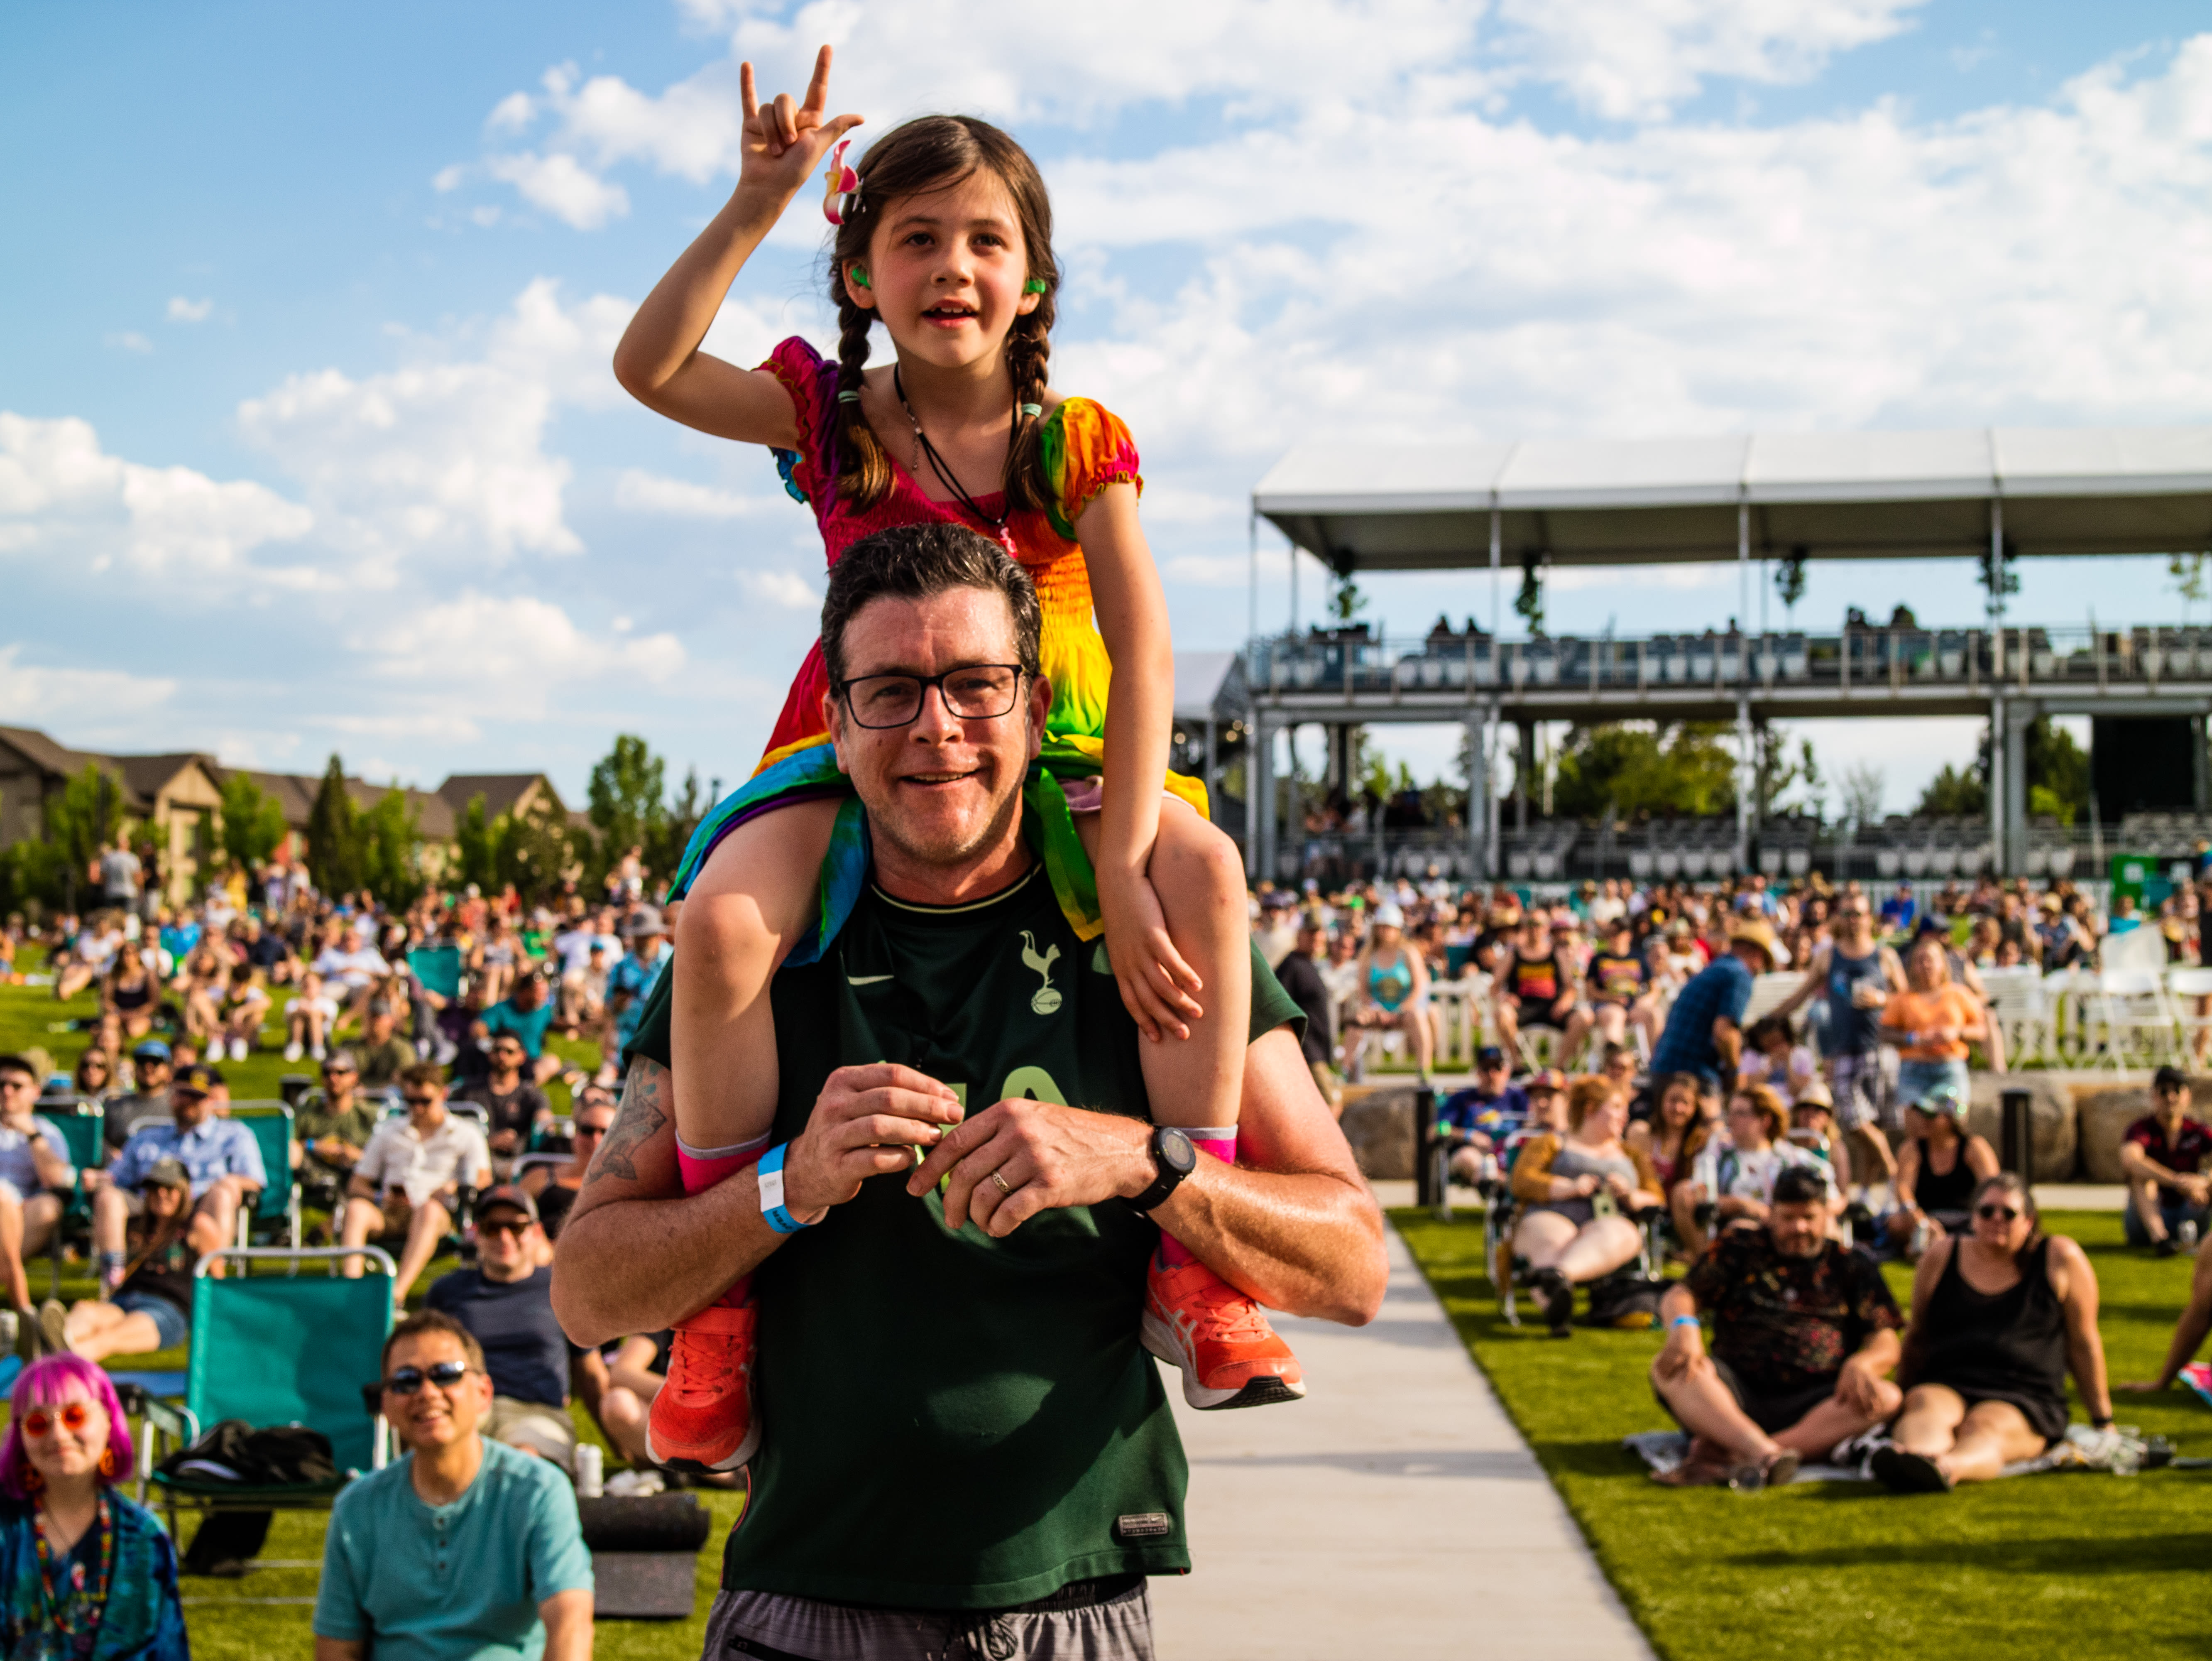 Residents catching a show at the Hayden Homes Amphitheatre near The Veridian in Bend, Oregon